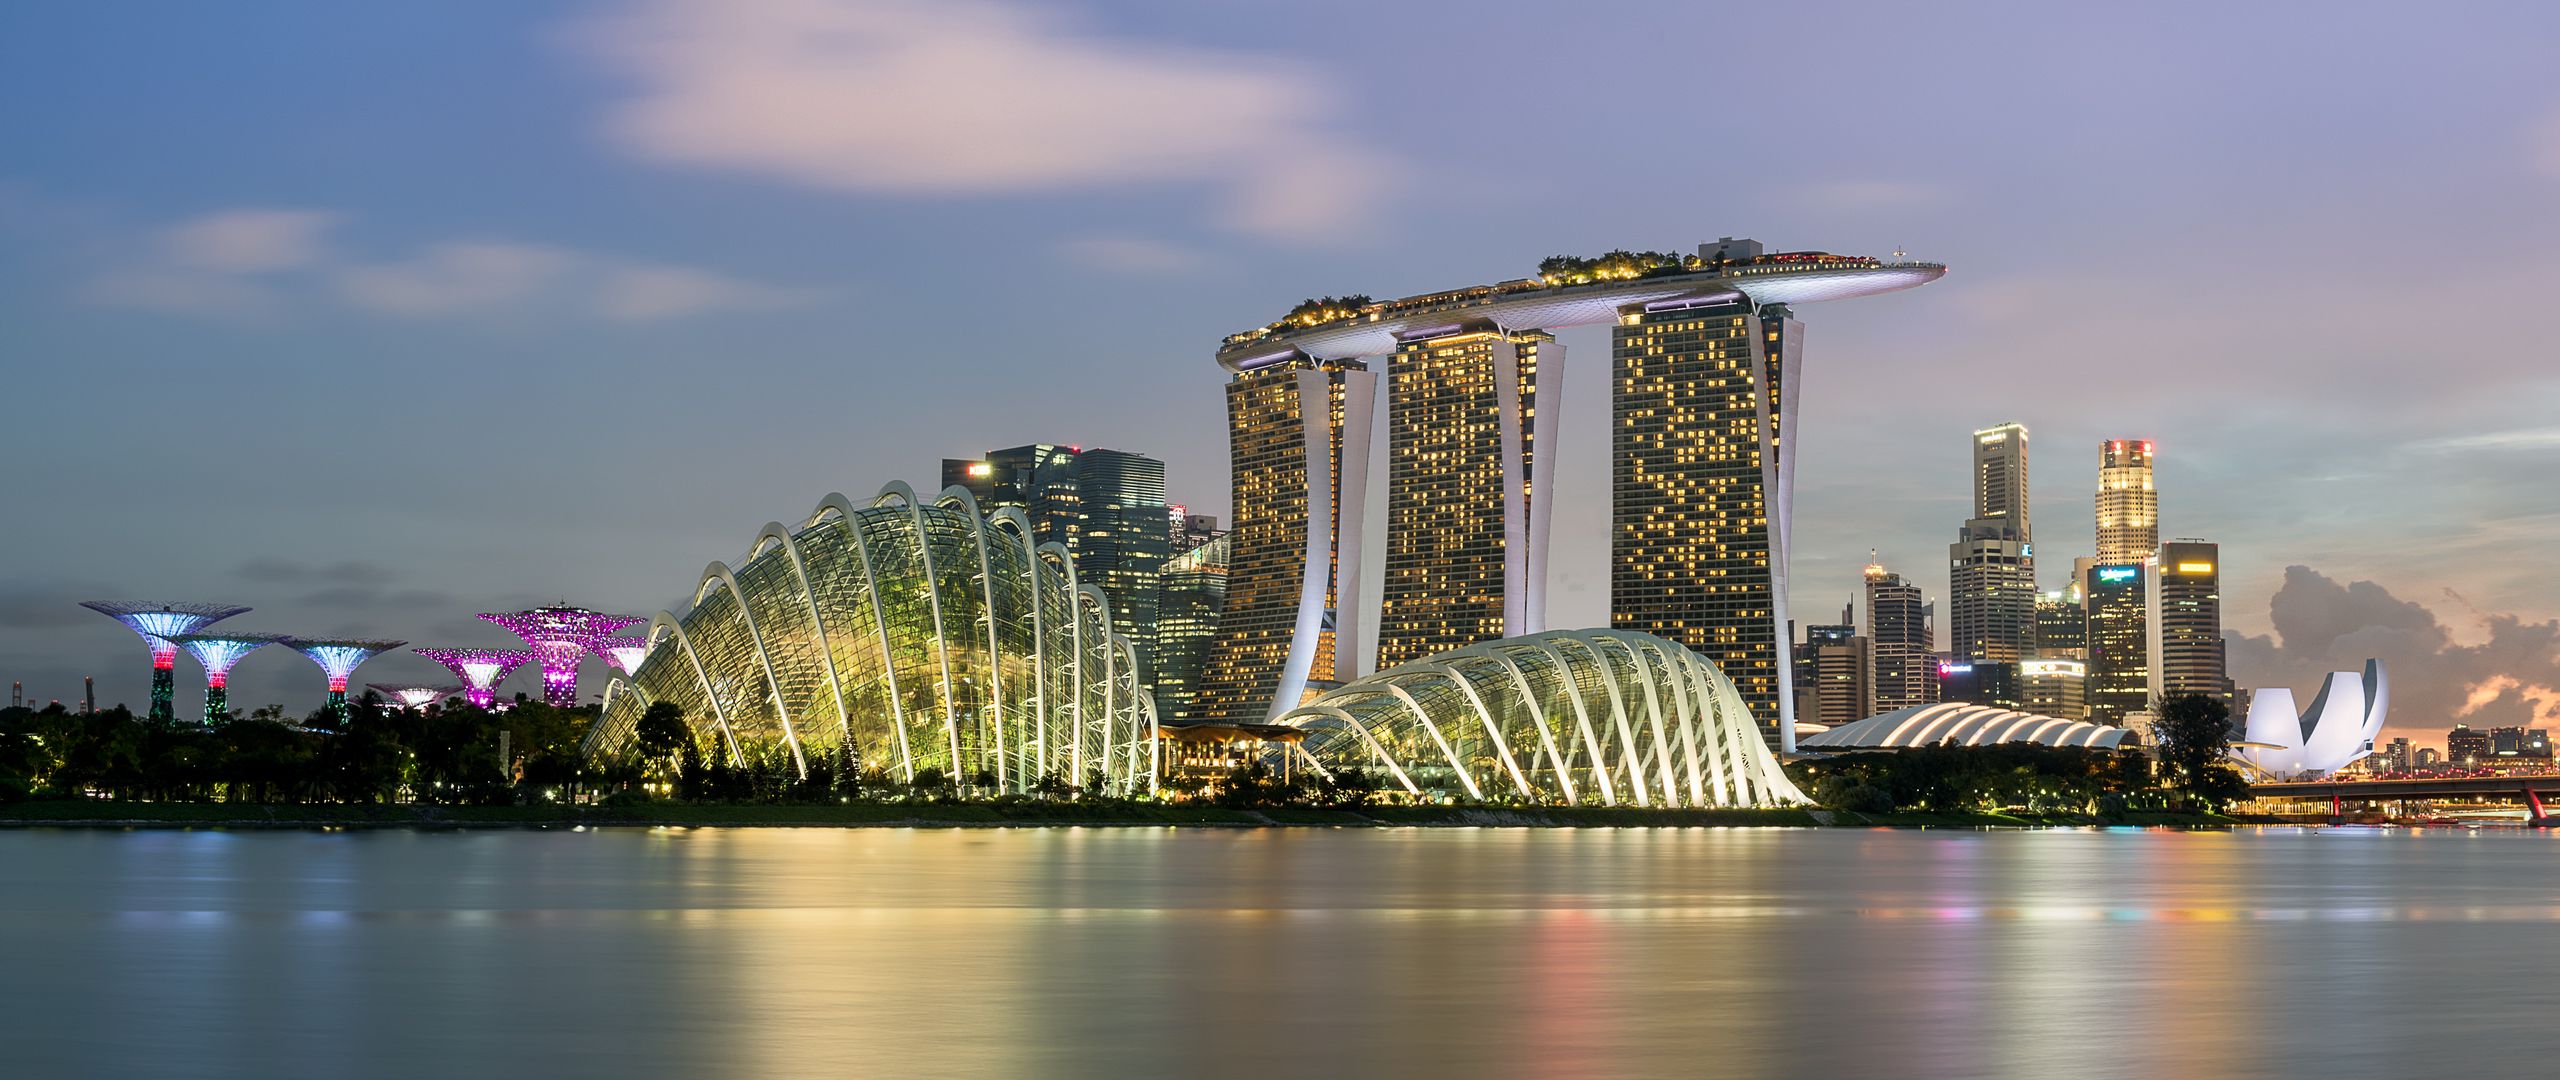 Download wallpaper 2560x1080 singapore, skyscrapers, panorama dual wide  1080p hd background